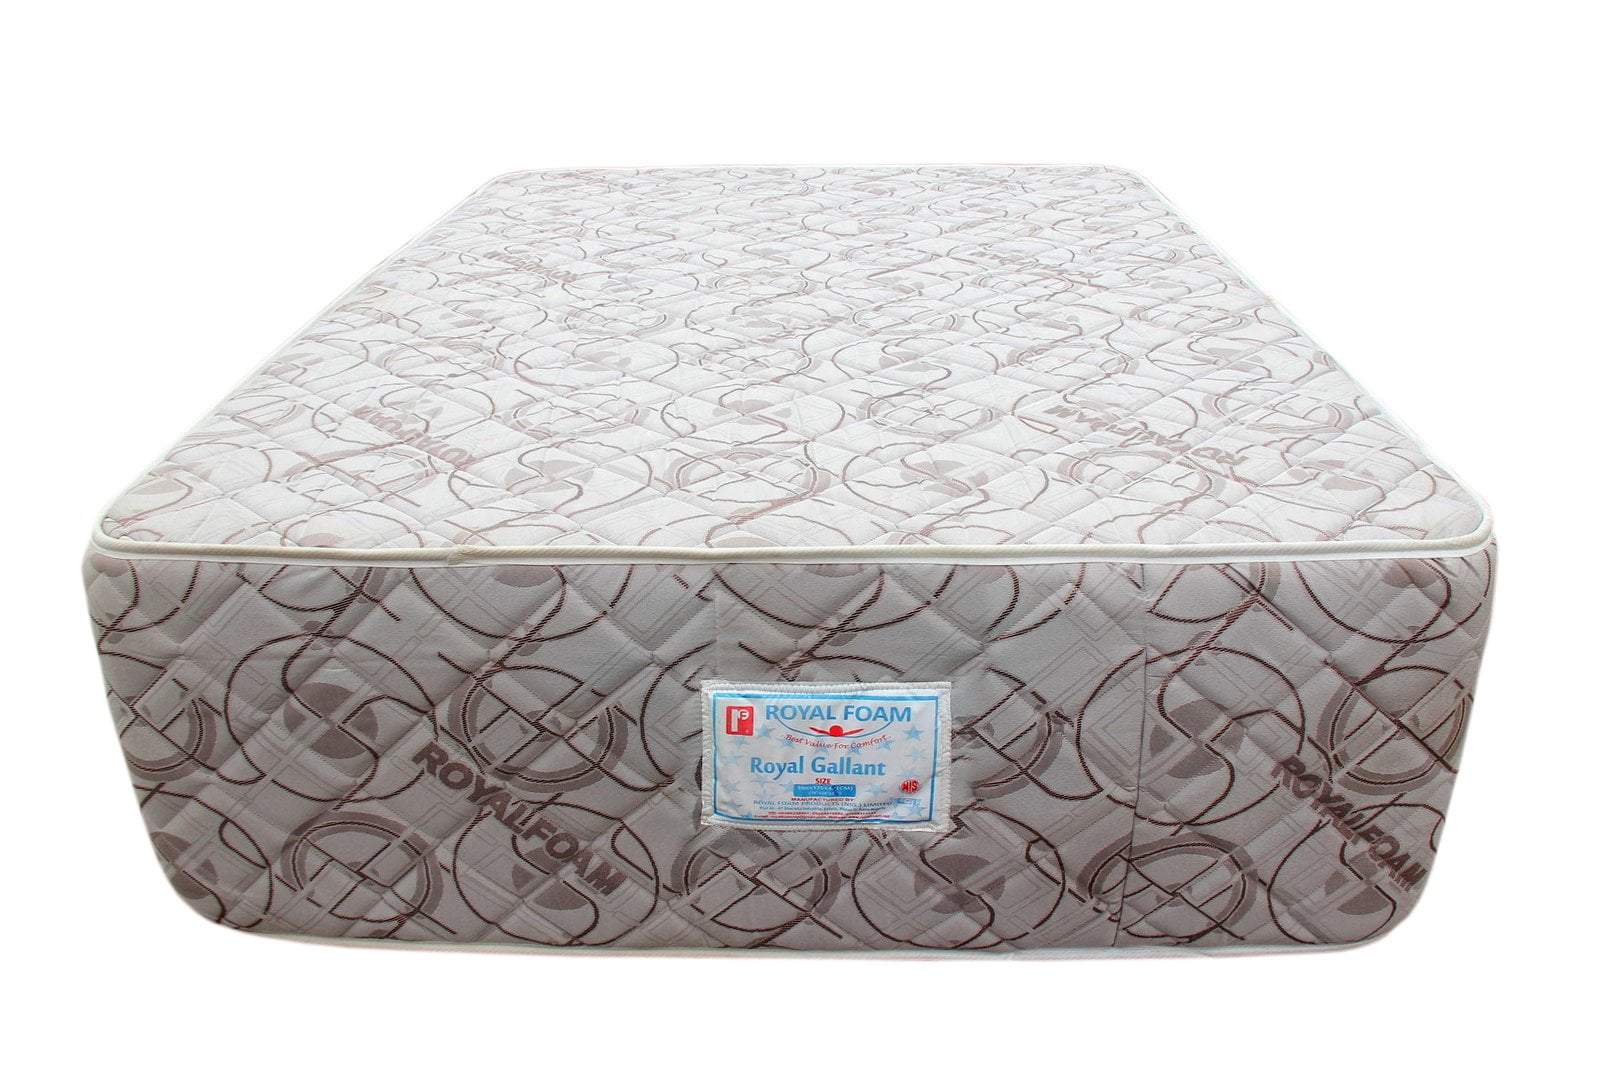 Royal Gallant Plus JACQUARD fabric-Fully Quilted Mattress 190 X 135 X 20 CM(6ft x 4.5ft x 8inches) Single(Lagos Only)